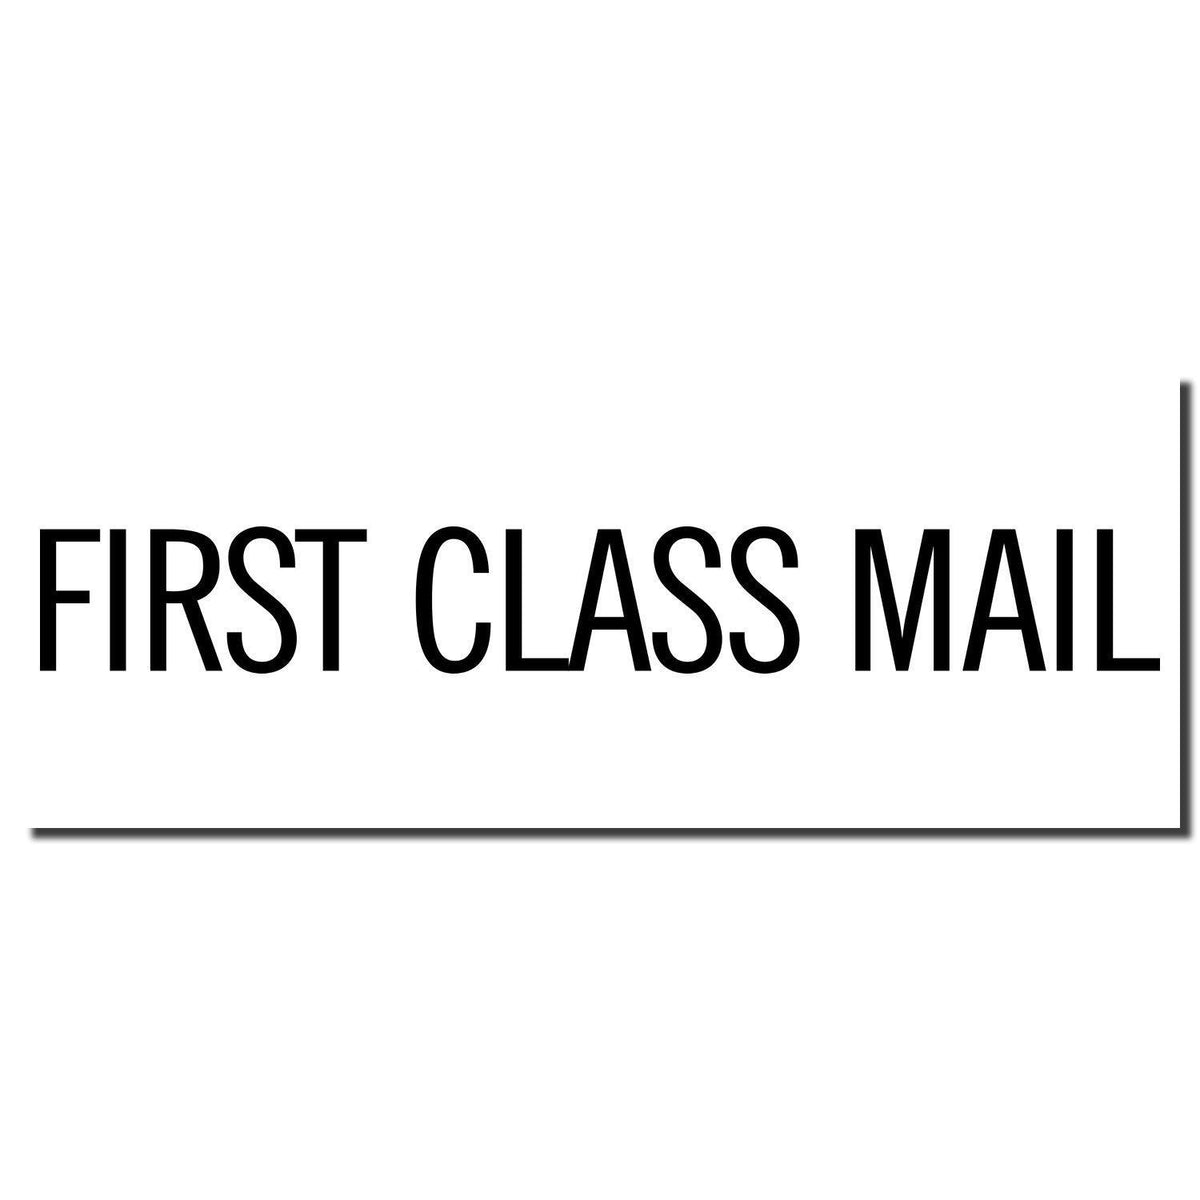 Enlarged Imprint Large Narrow First Class Mail Rubber Stamp Sample